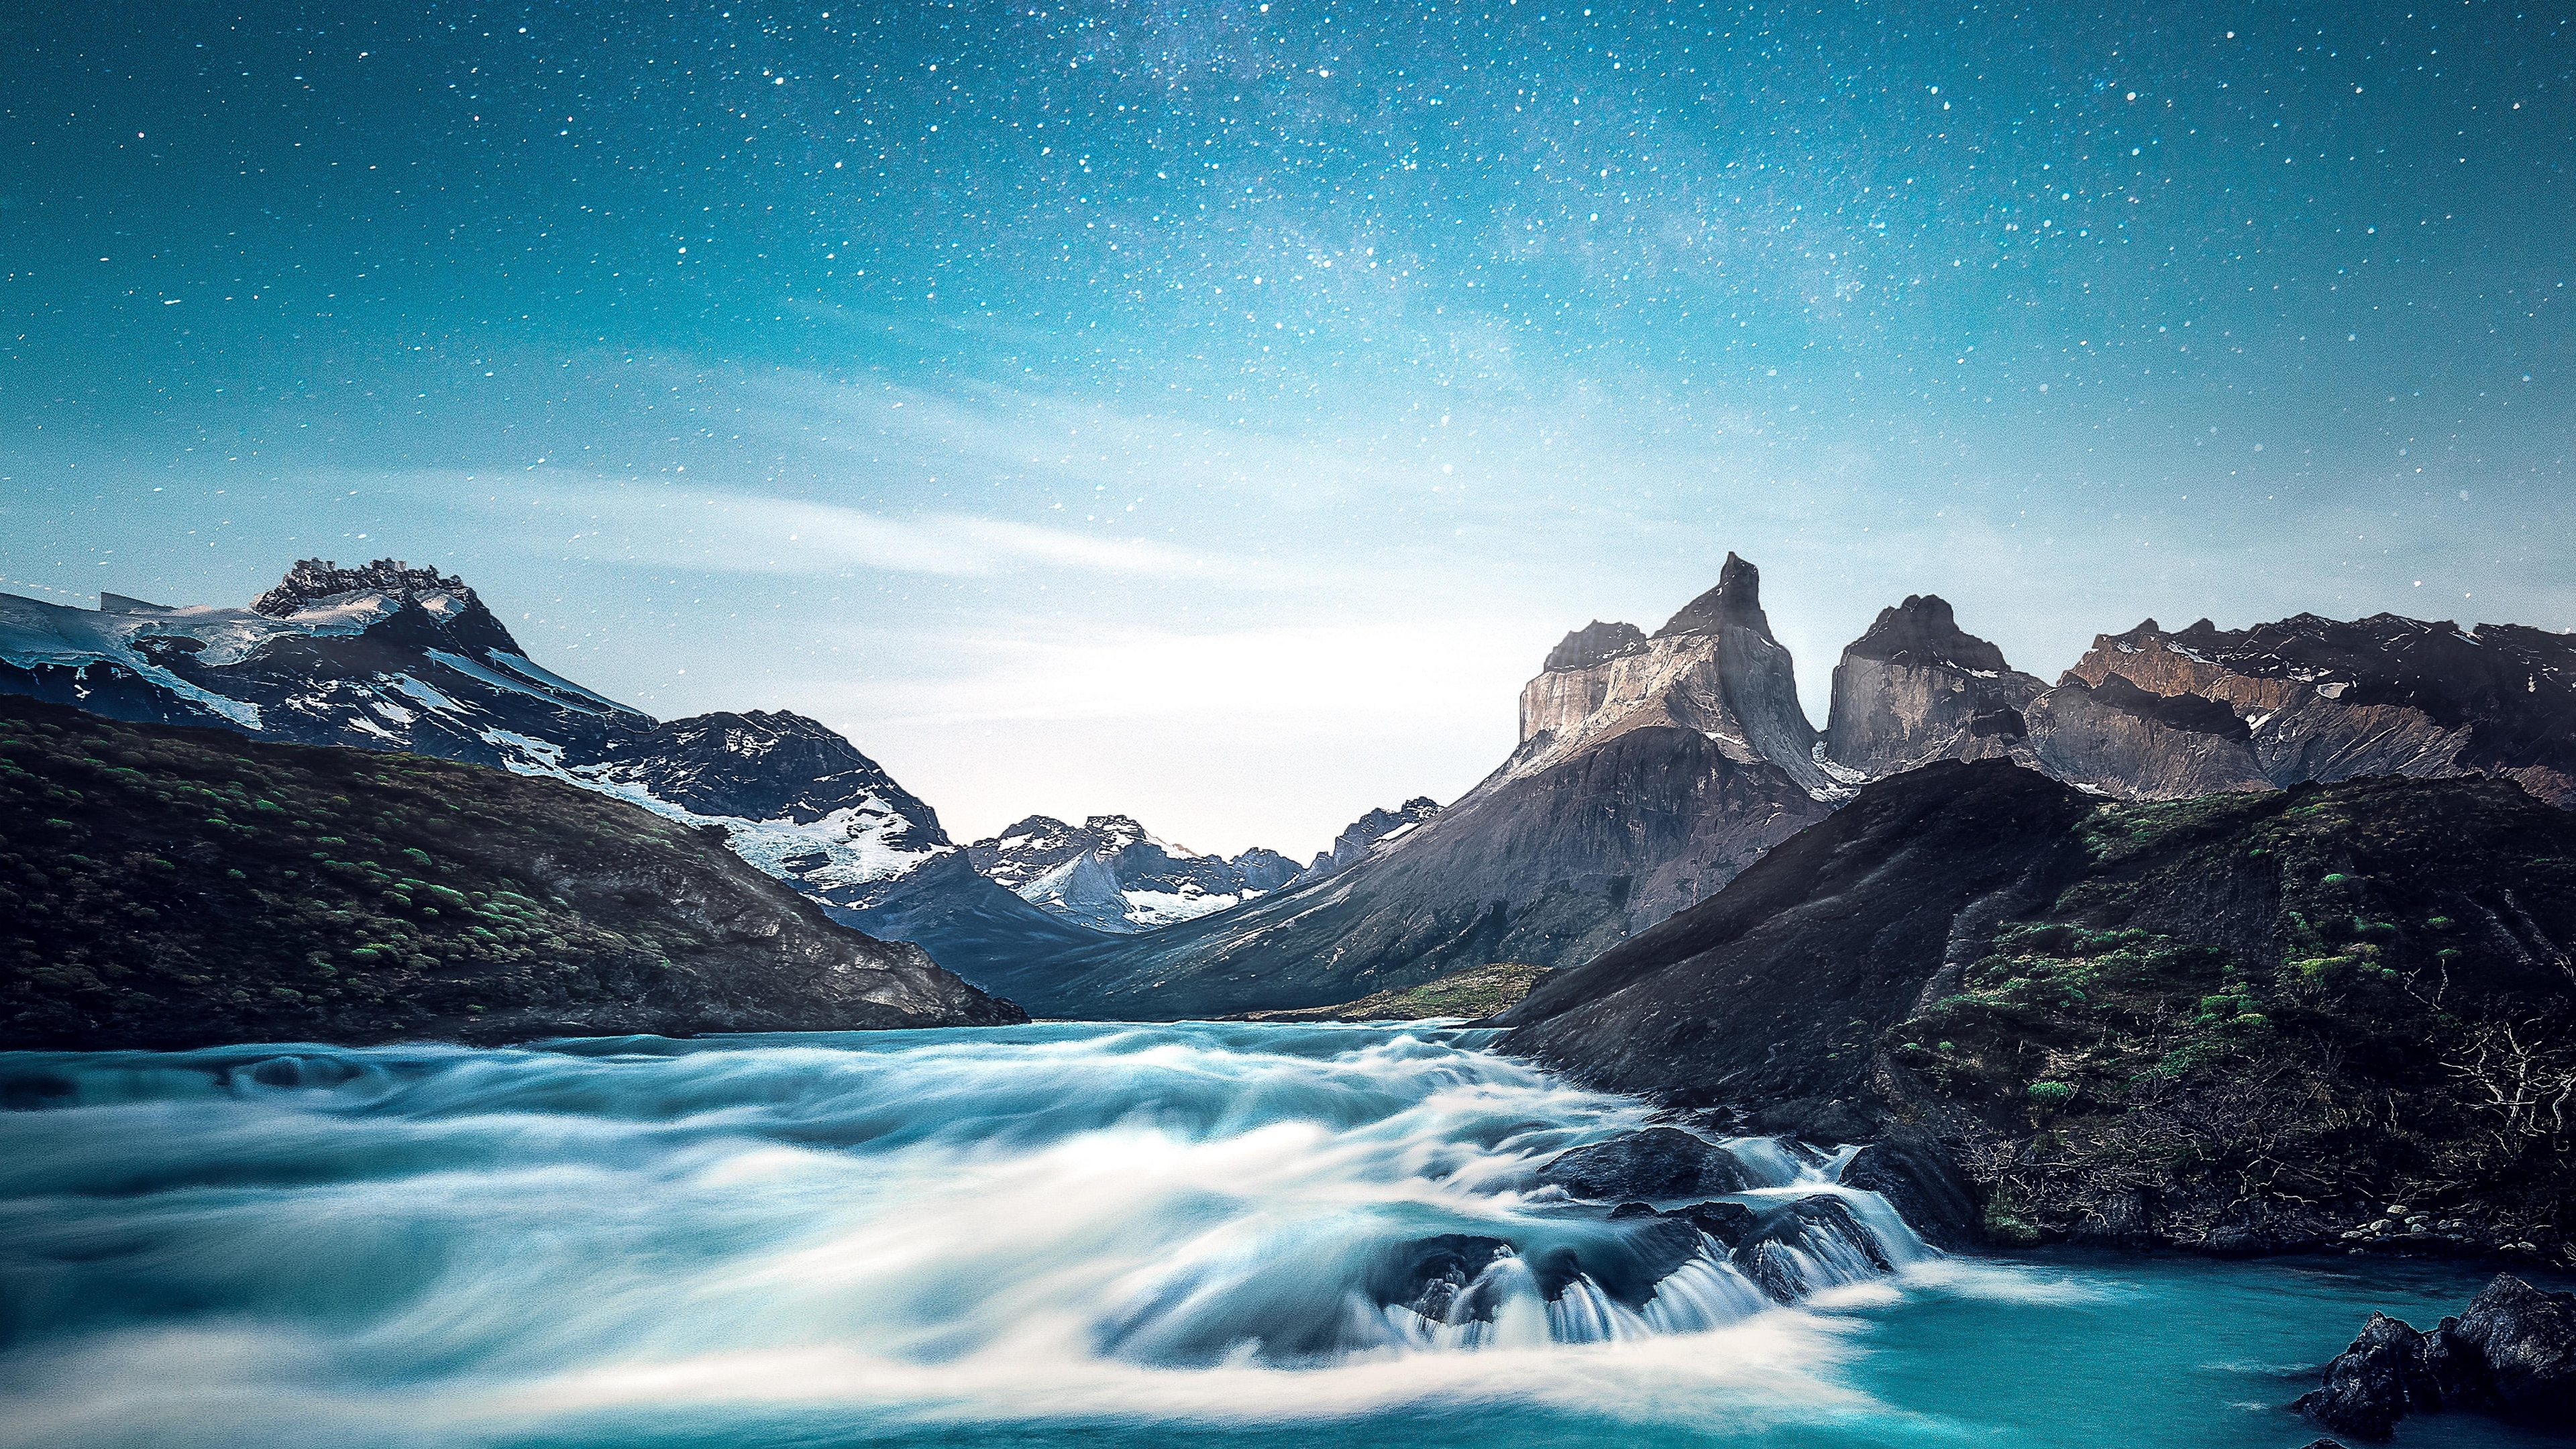 Mountains with river and stars Wallpaper 8k Ultra HD ID:3041